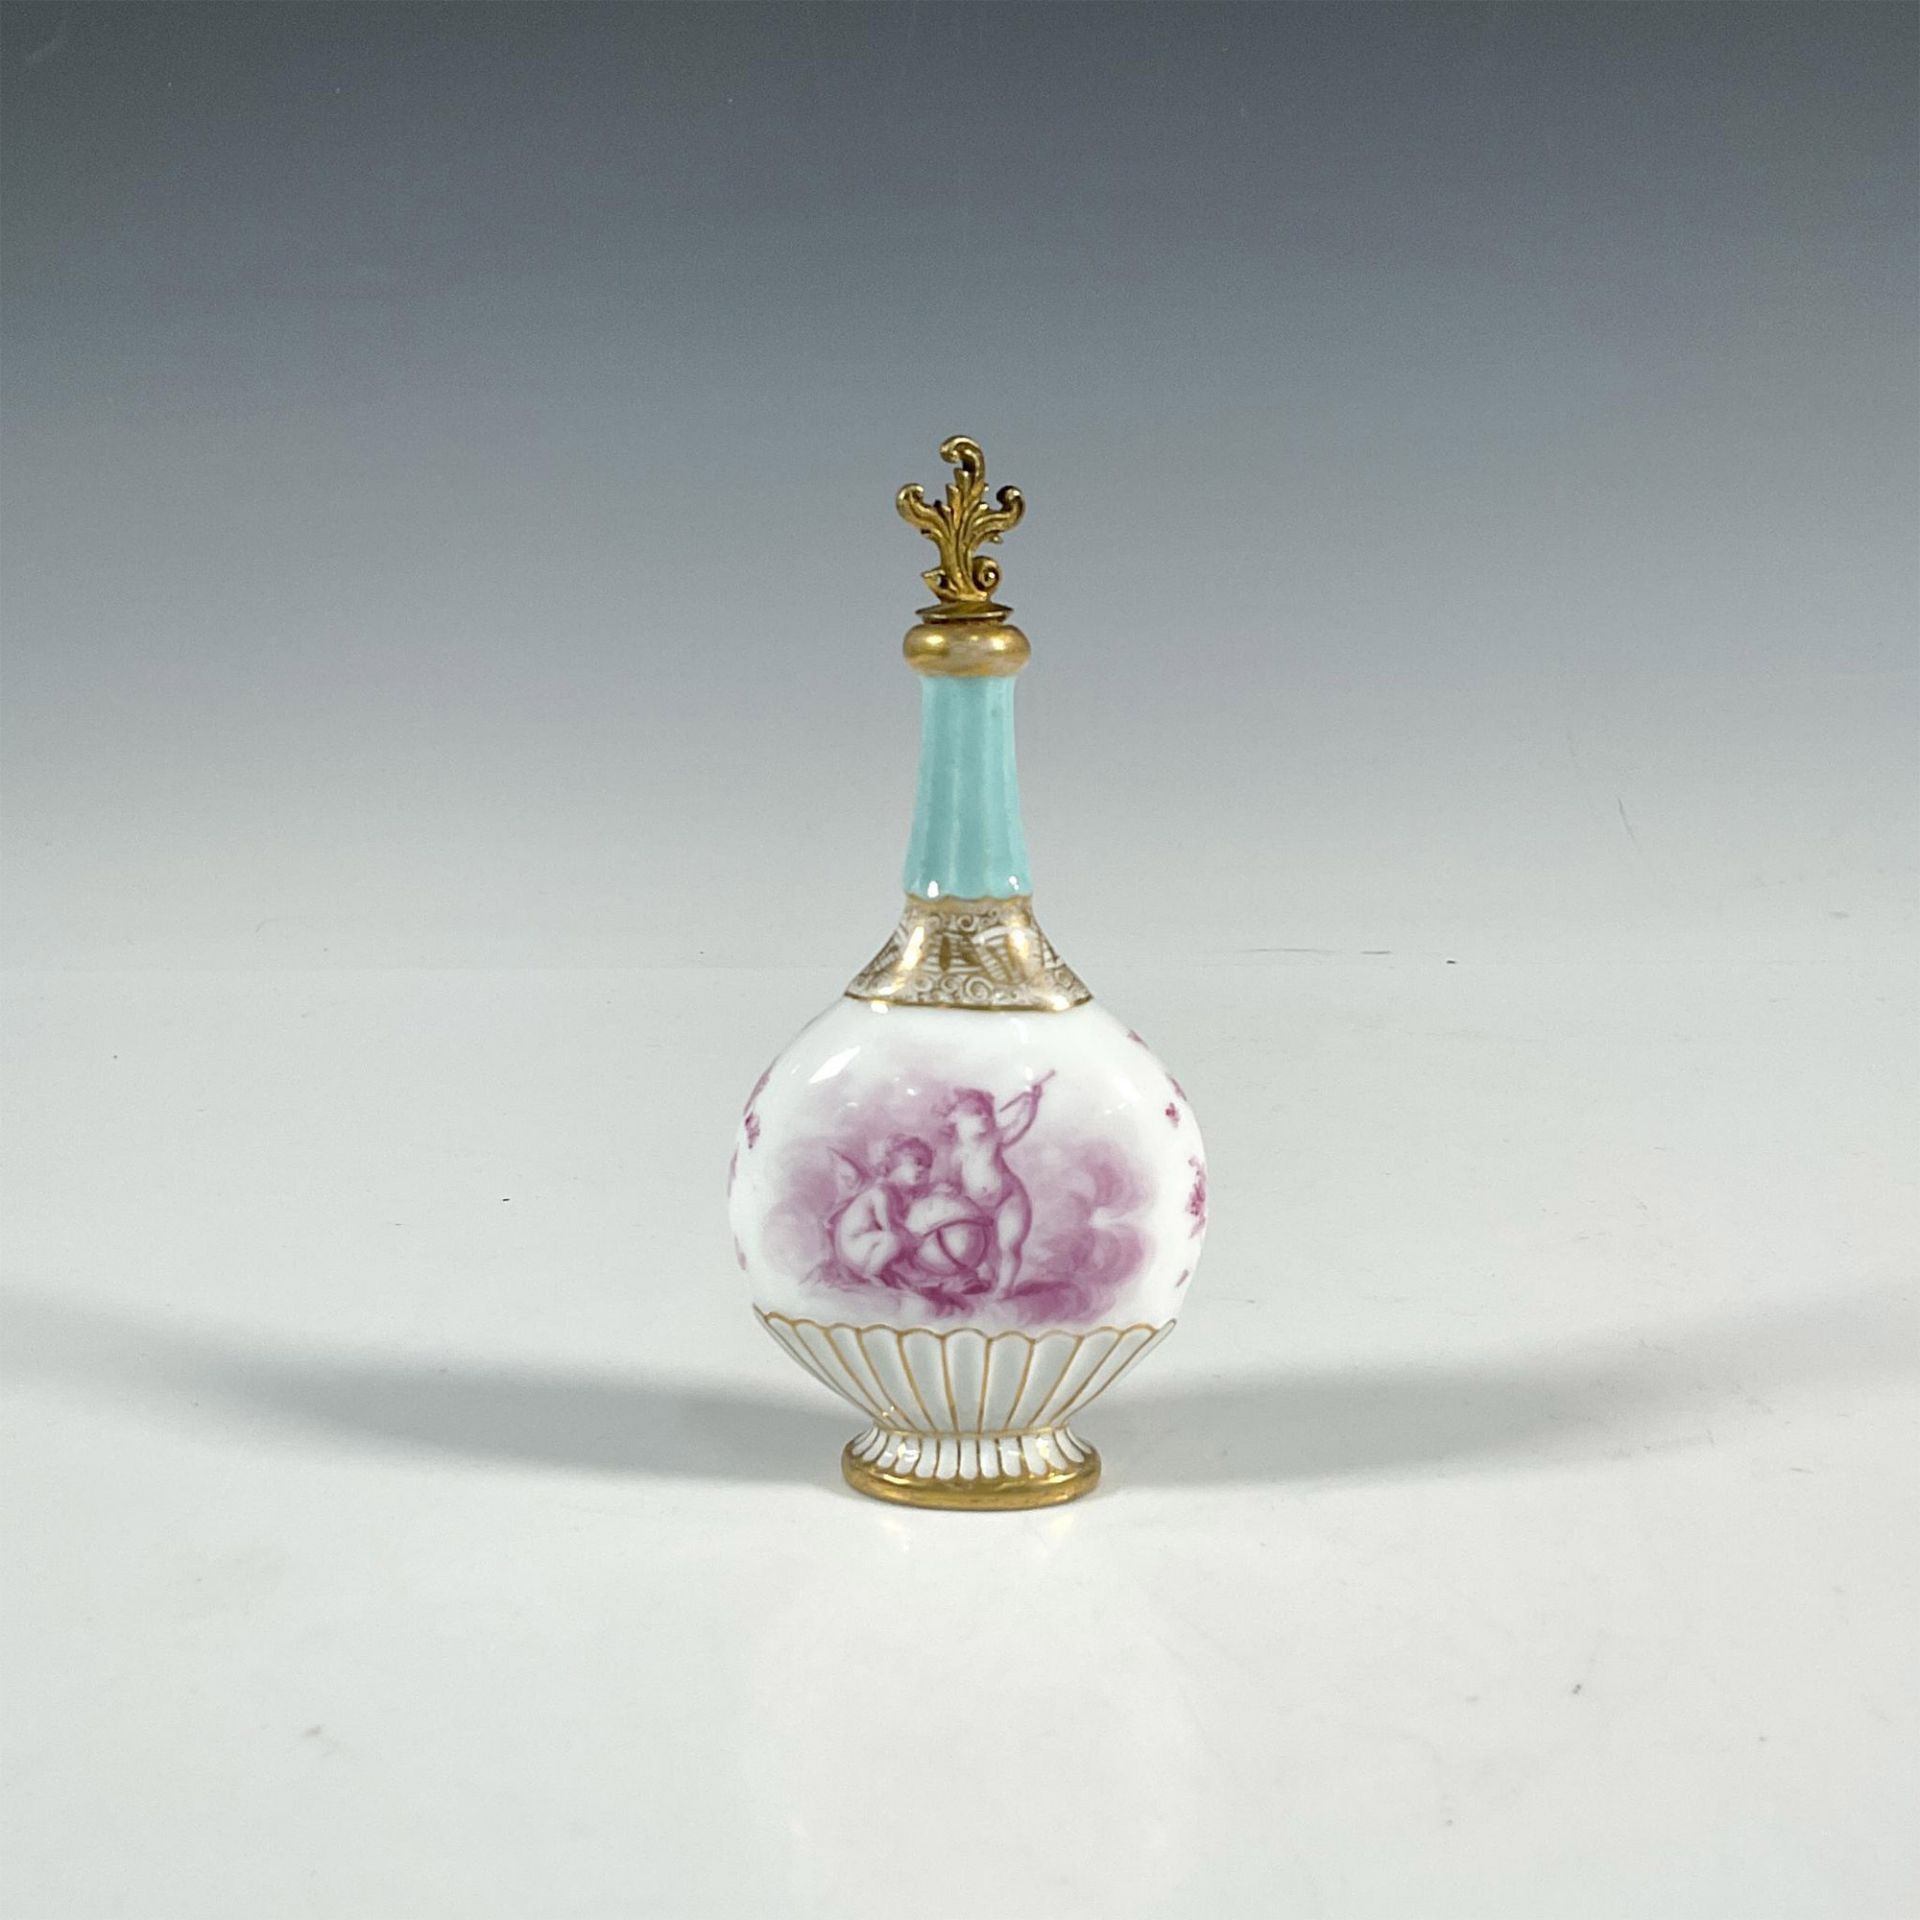 18th Century European Porcelain Scent Bottle and Stopper - Image 3 of 5